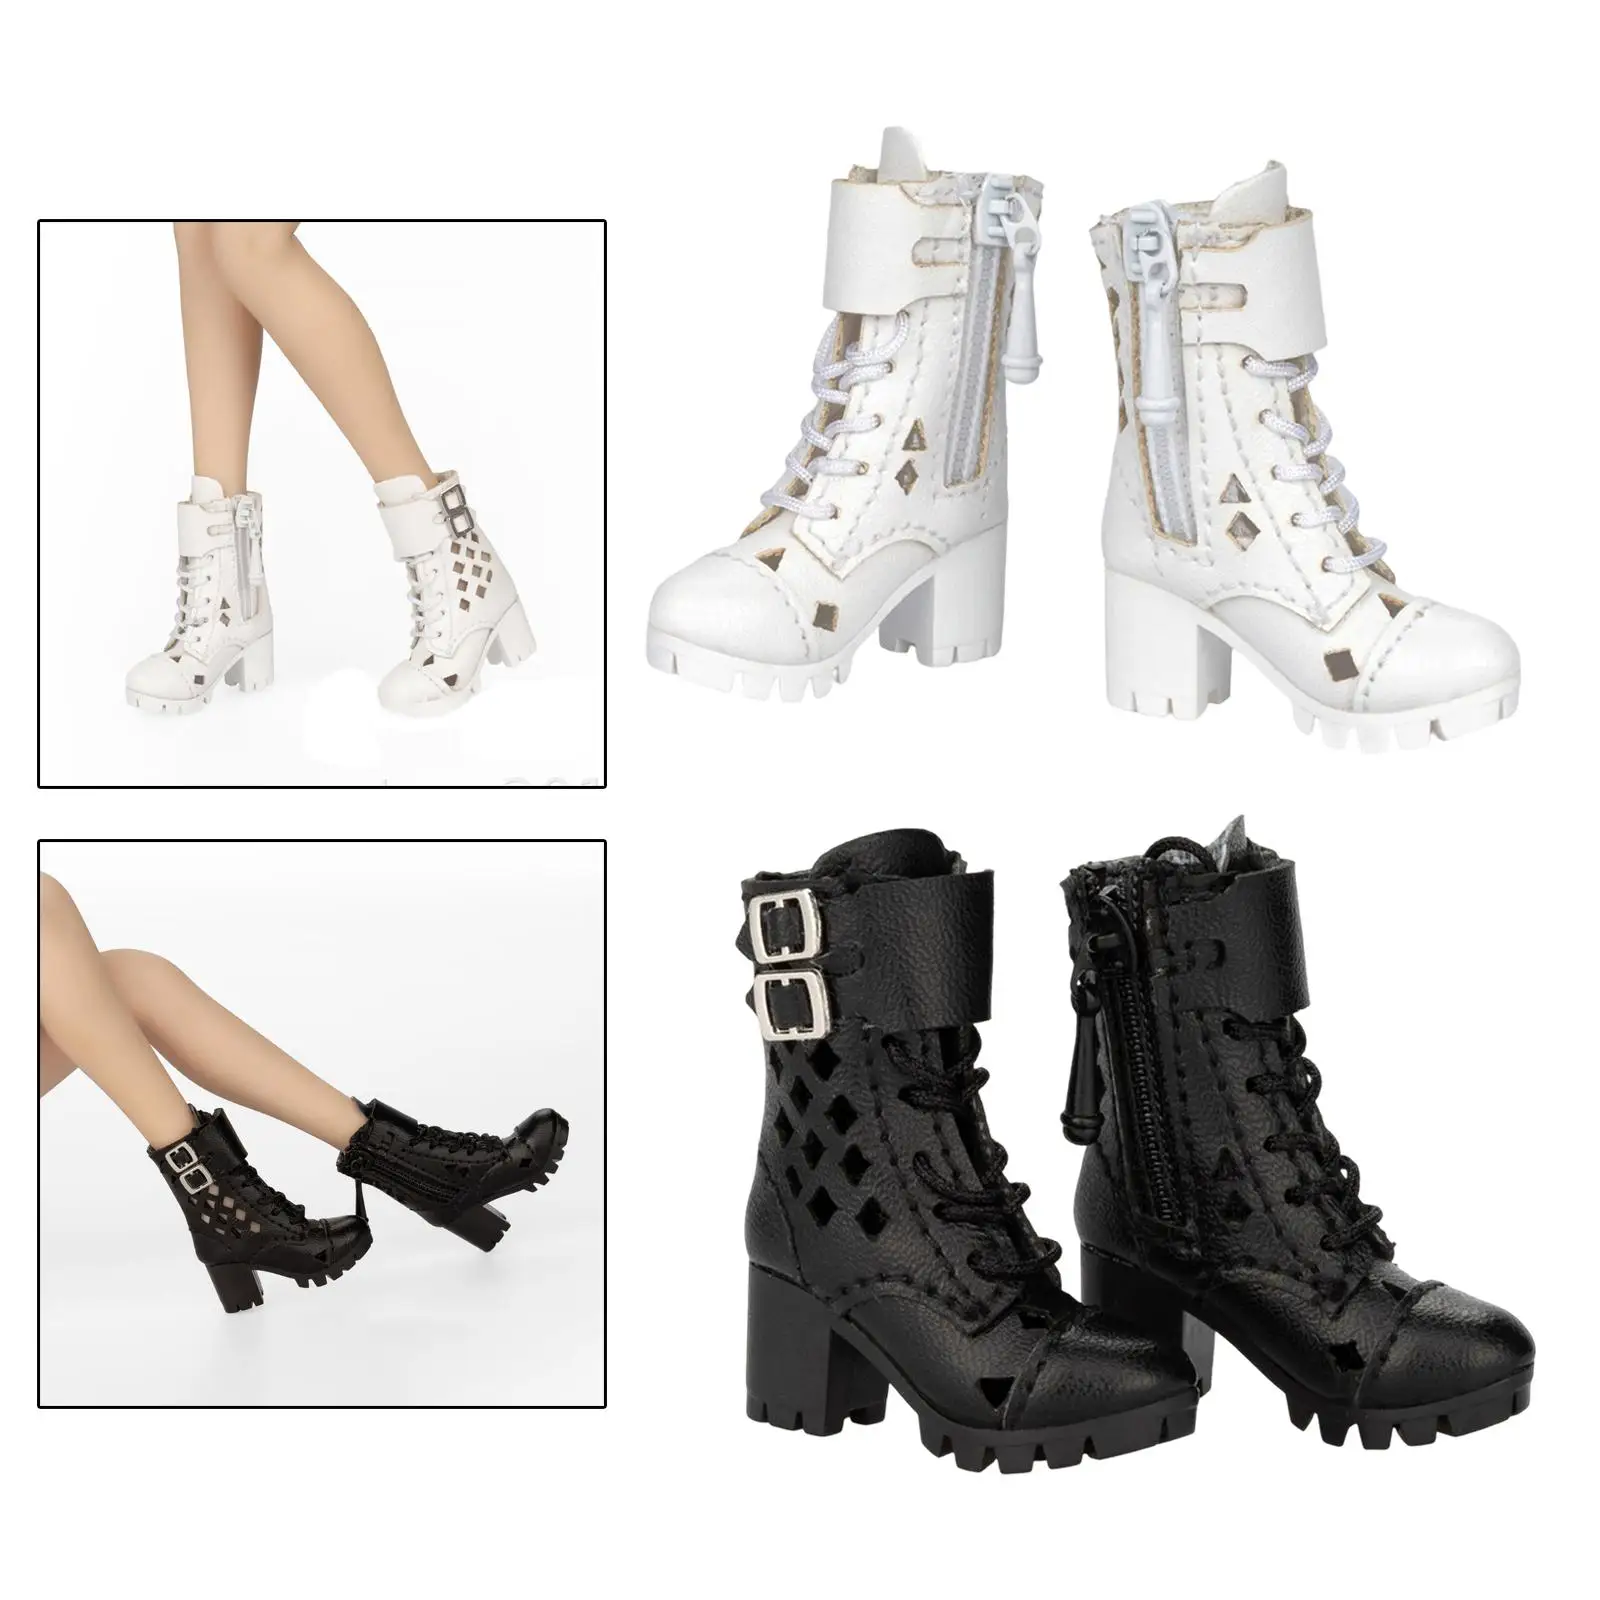 1/6 High Heeled Shoes Black Boot for 12